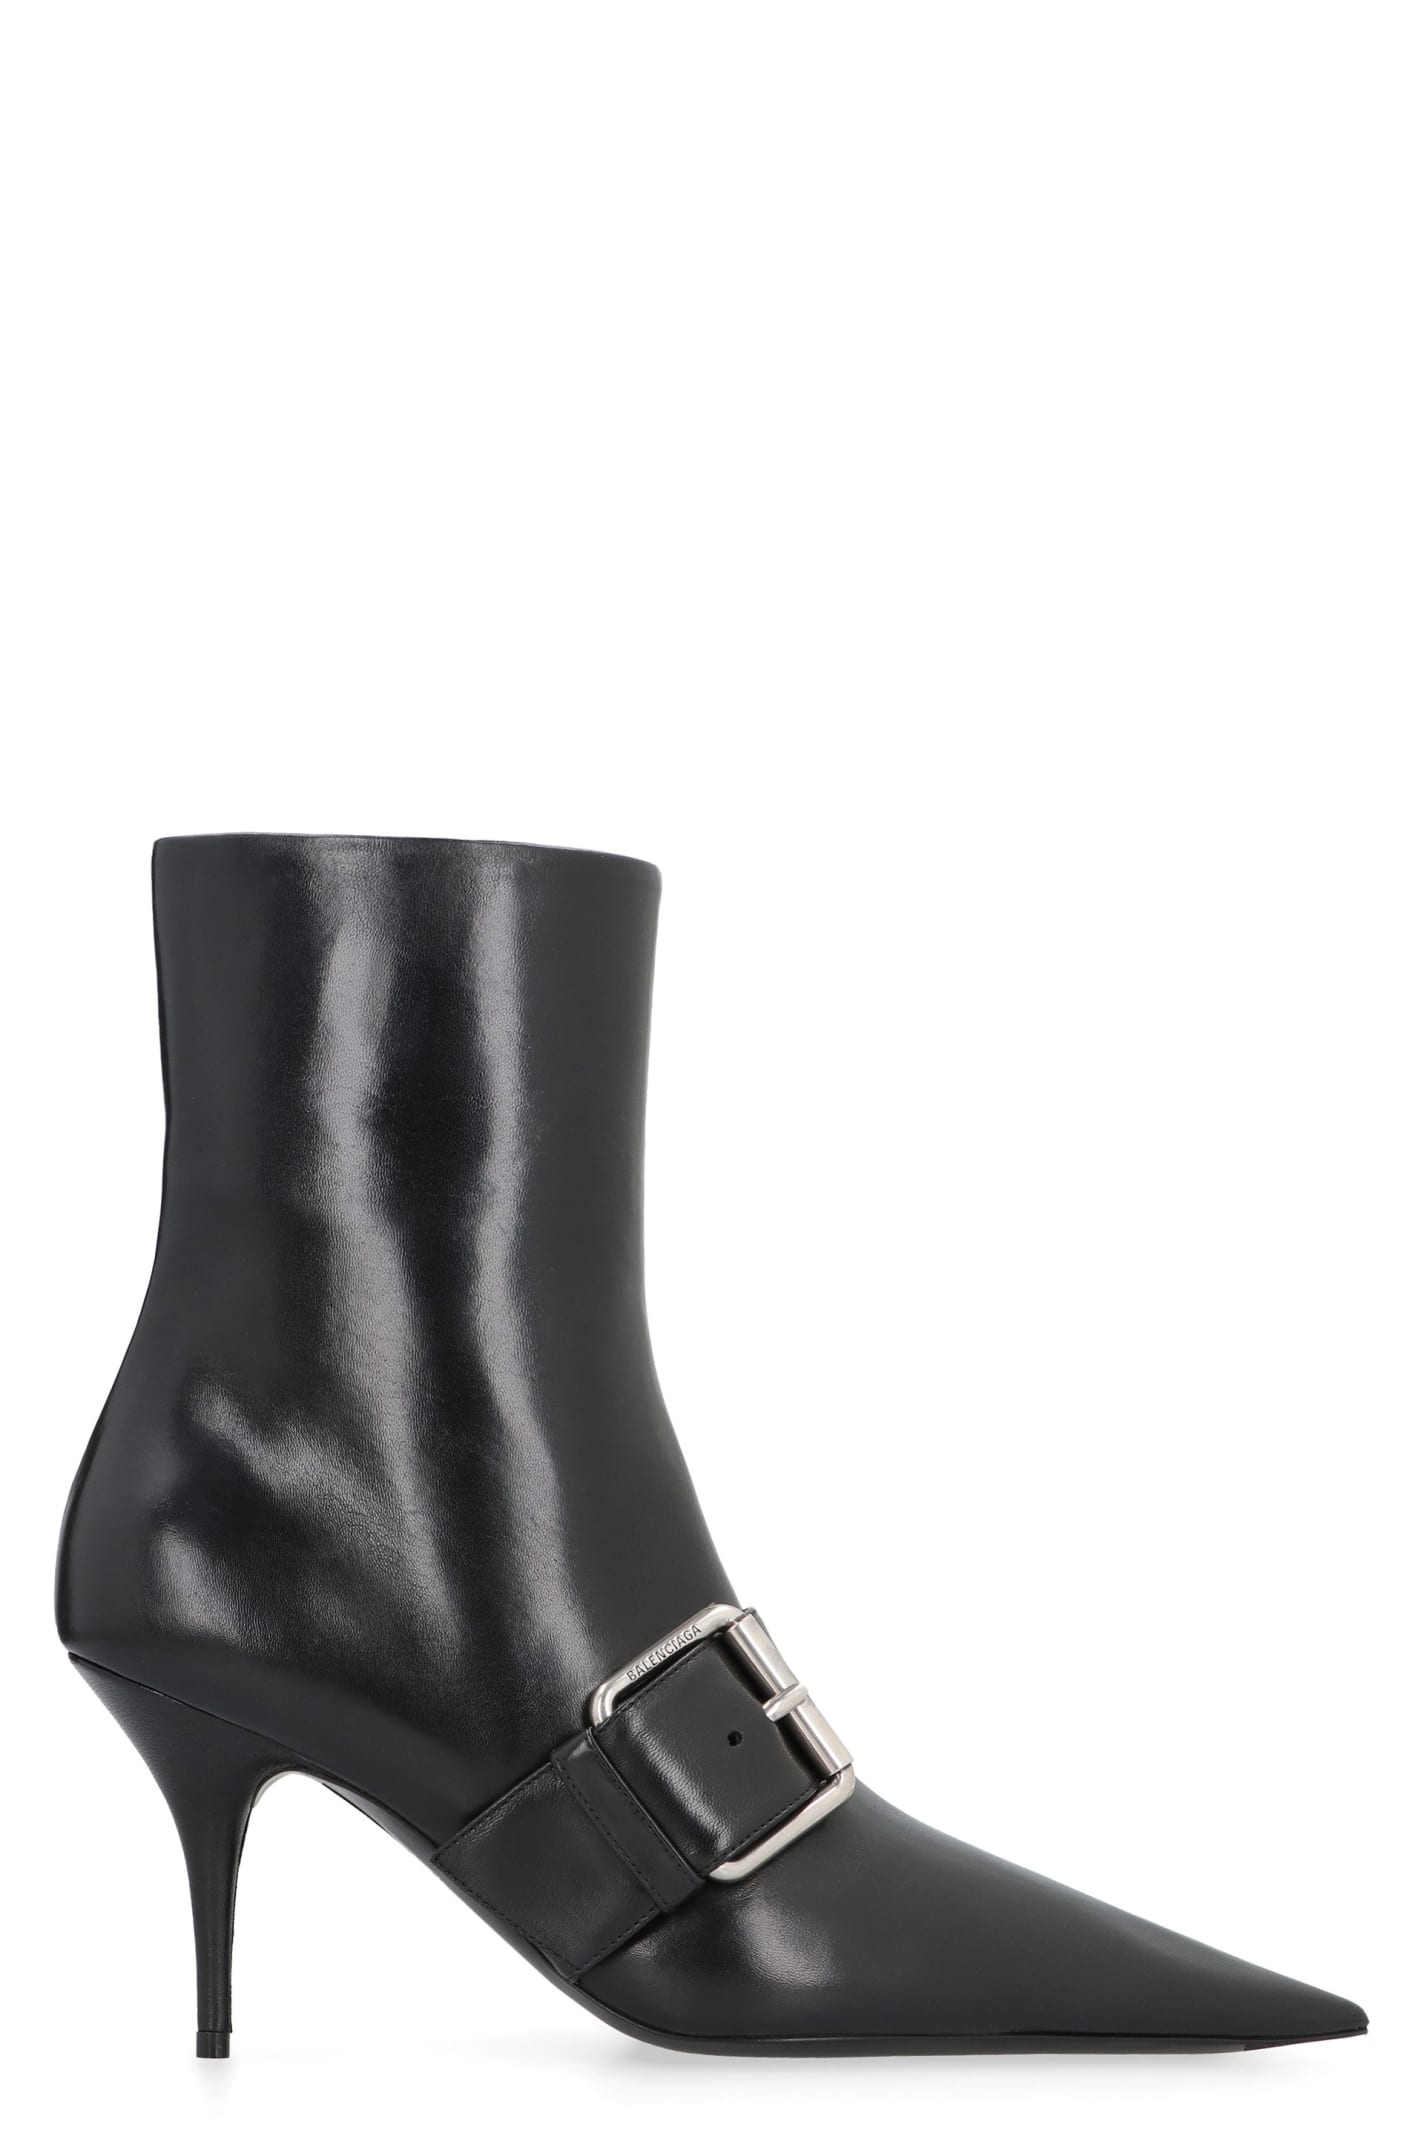 Balenciaga Knife 80 Leather Ankle Boots In Black